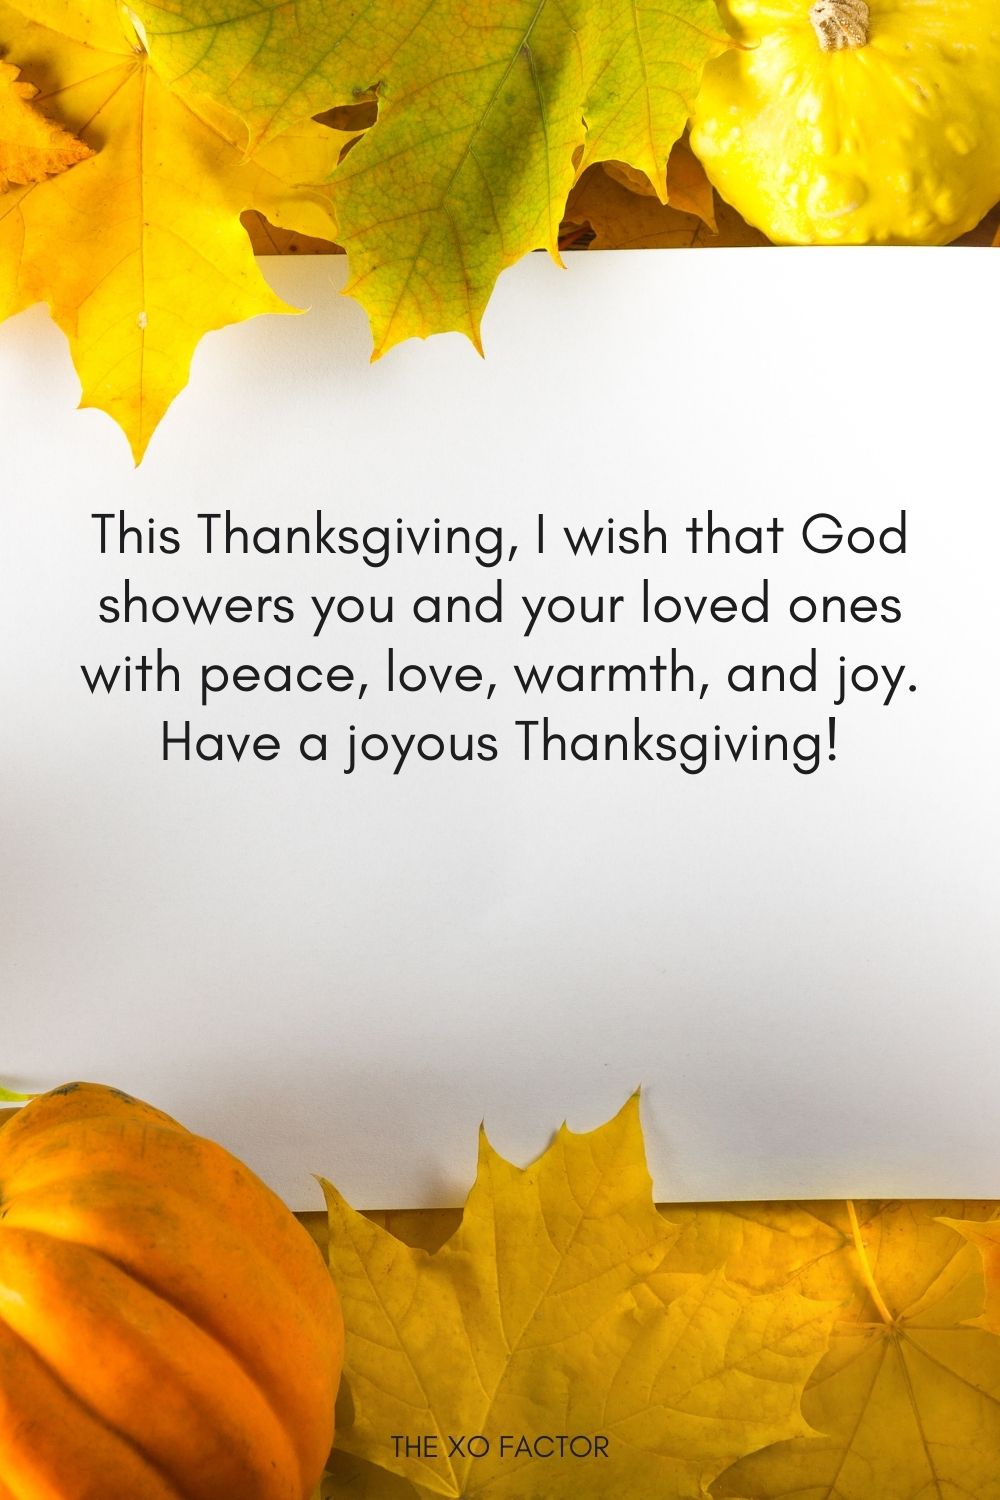 This Thanksgiving, I wish that God showers you and your loved ones with peace, love, warmth, and joy. Have a joyous Thanksgiving